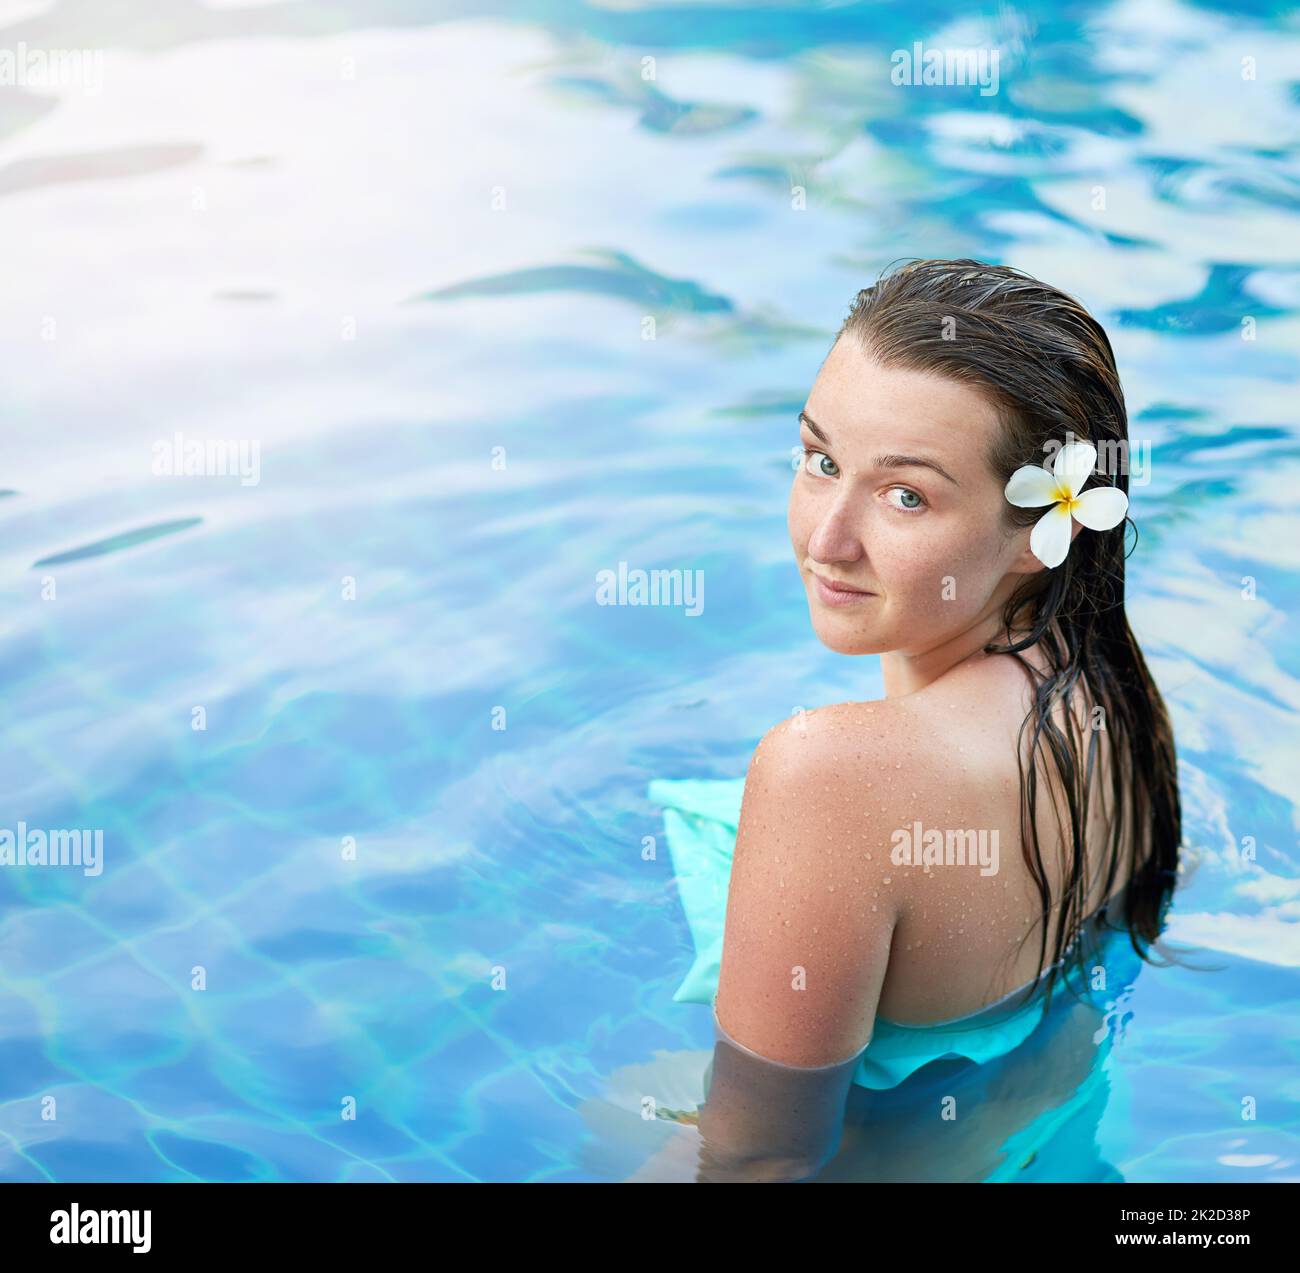 Enjoying a day of leisure and luxury. Portrait of a young woman relaxing in the pool at a spa. Stock Photo